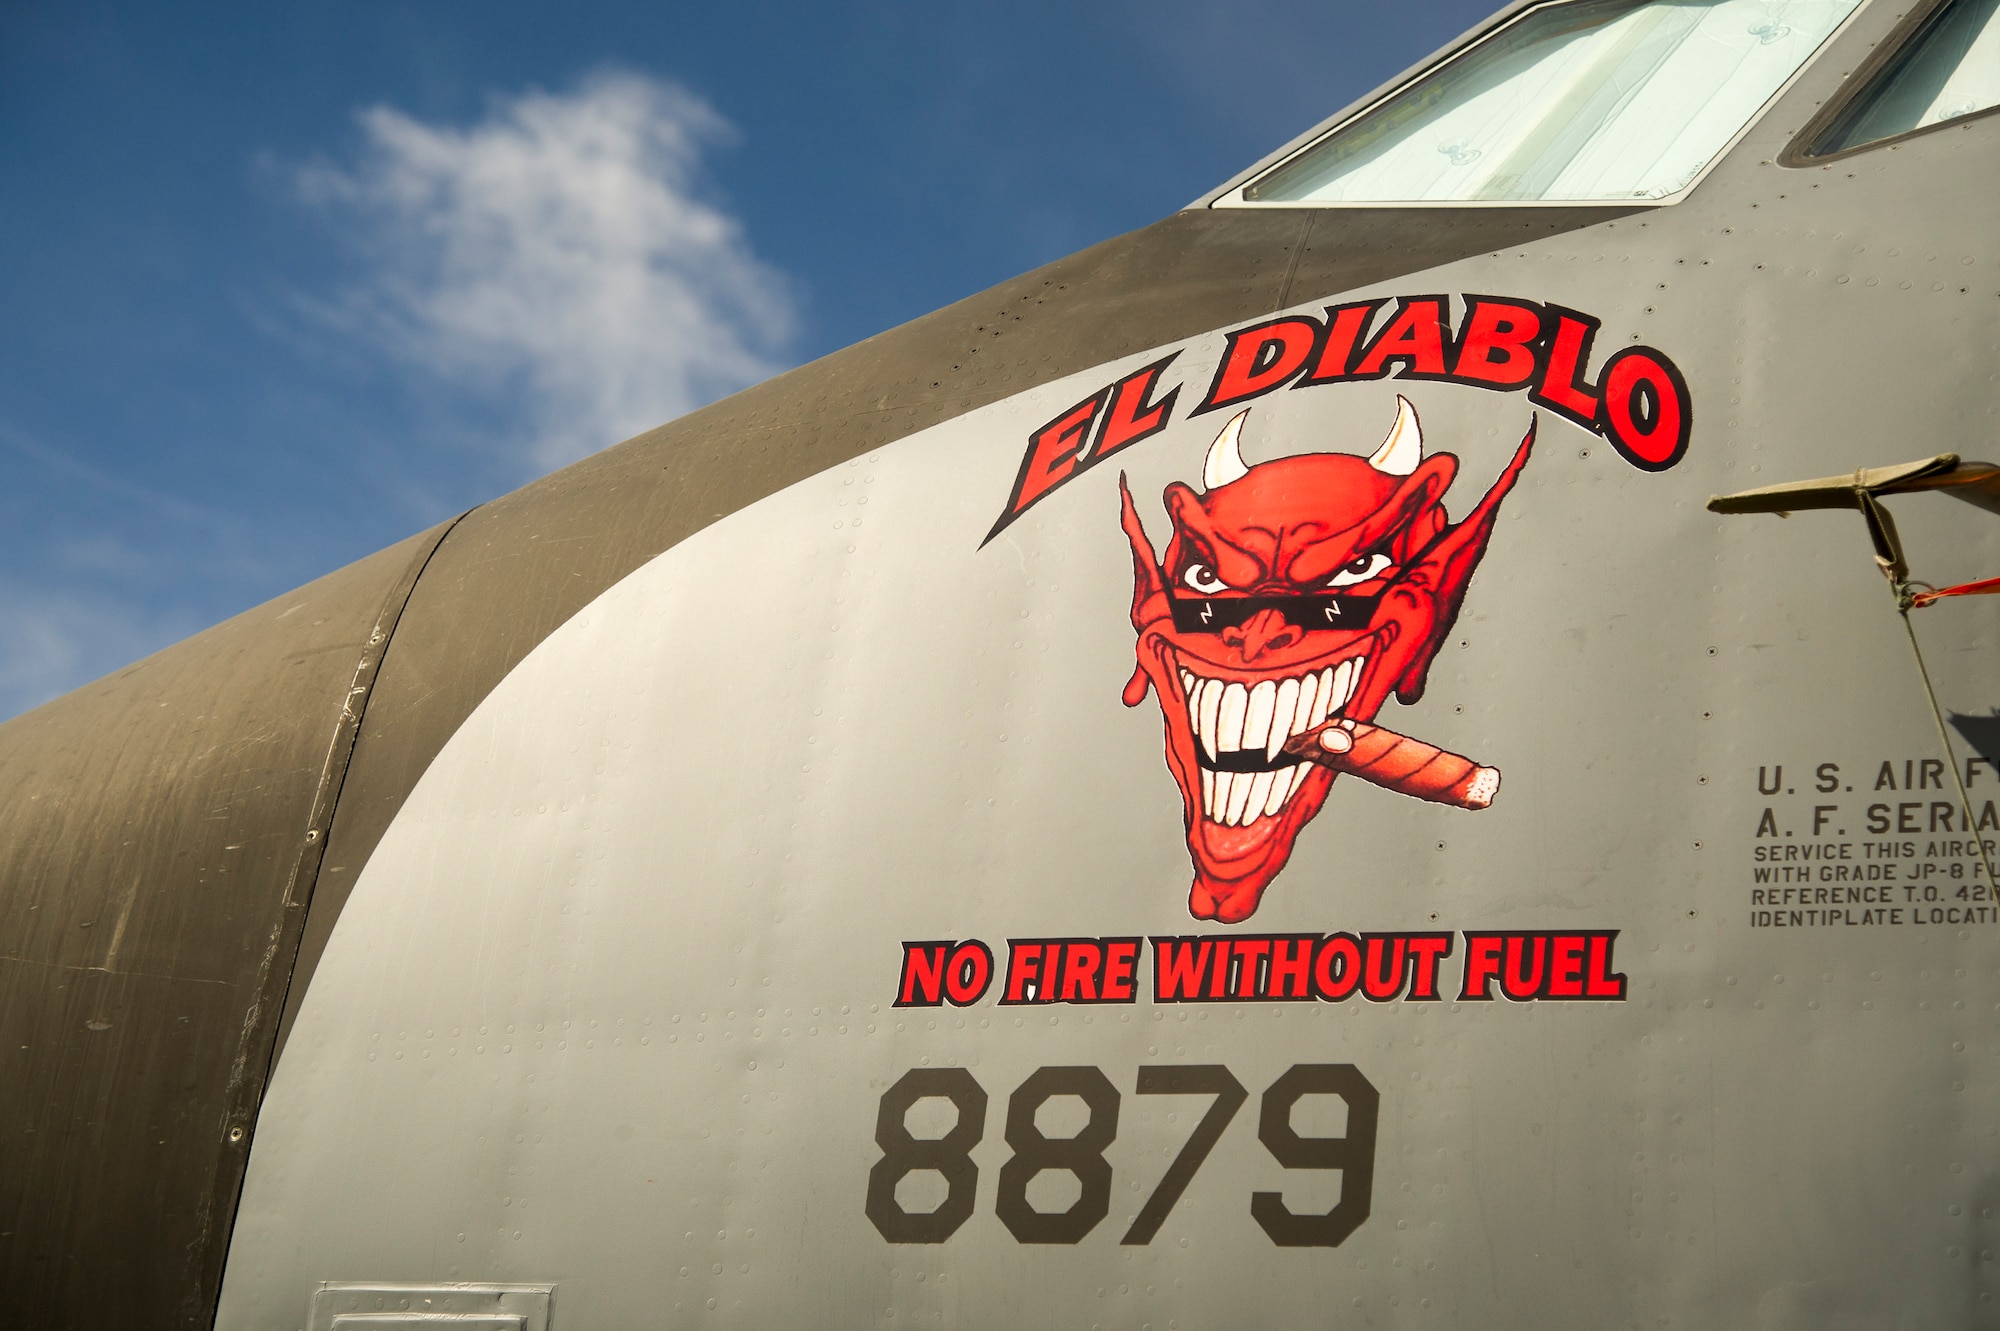 The “El Diablo” nose art is displayed on a KC-135 Stratotanker belonging to the 940th Air Refueling Wing May 6 at Beale Air Force Base, California.